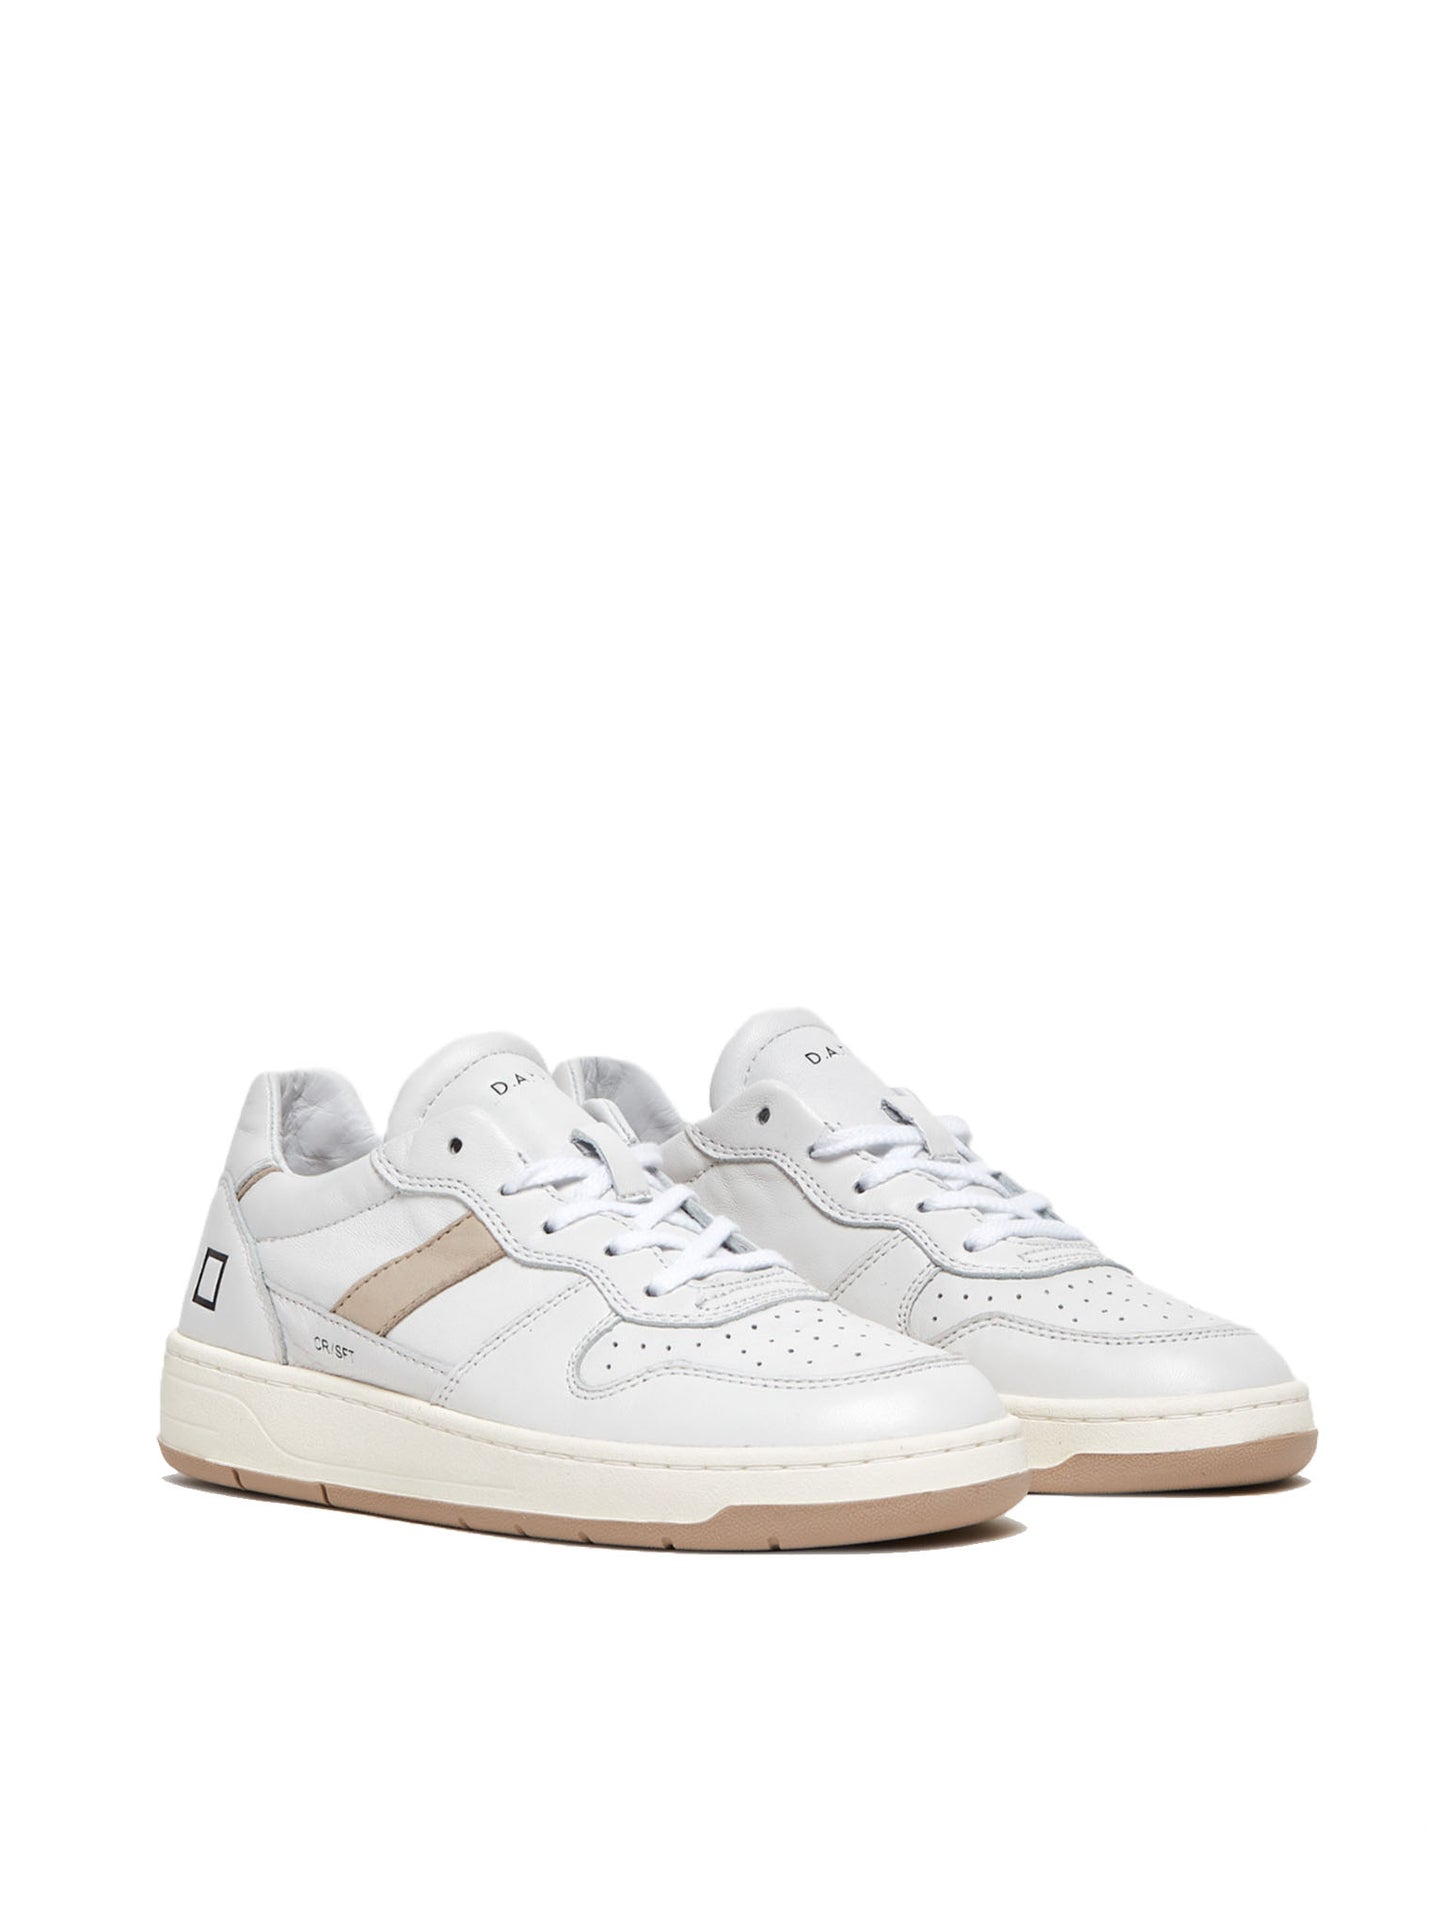 D.A.T.E Court 2.0 Soft White Natural Trainers